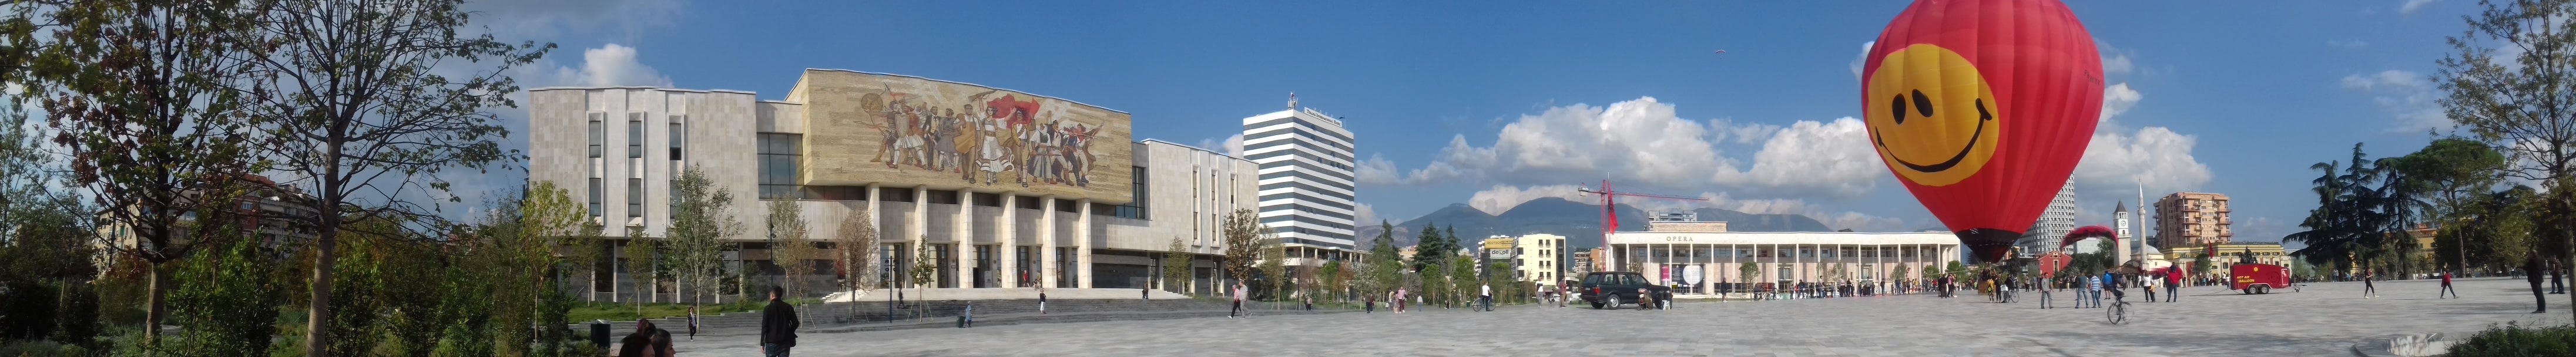 Panorama photo from the central square of Tirana. National Museum with the mosaic 'Albania', big baloon with a smiley face at the center of the square.